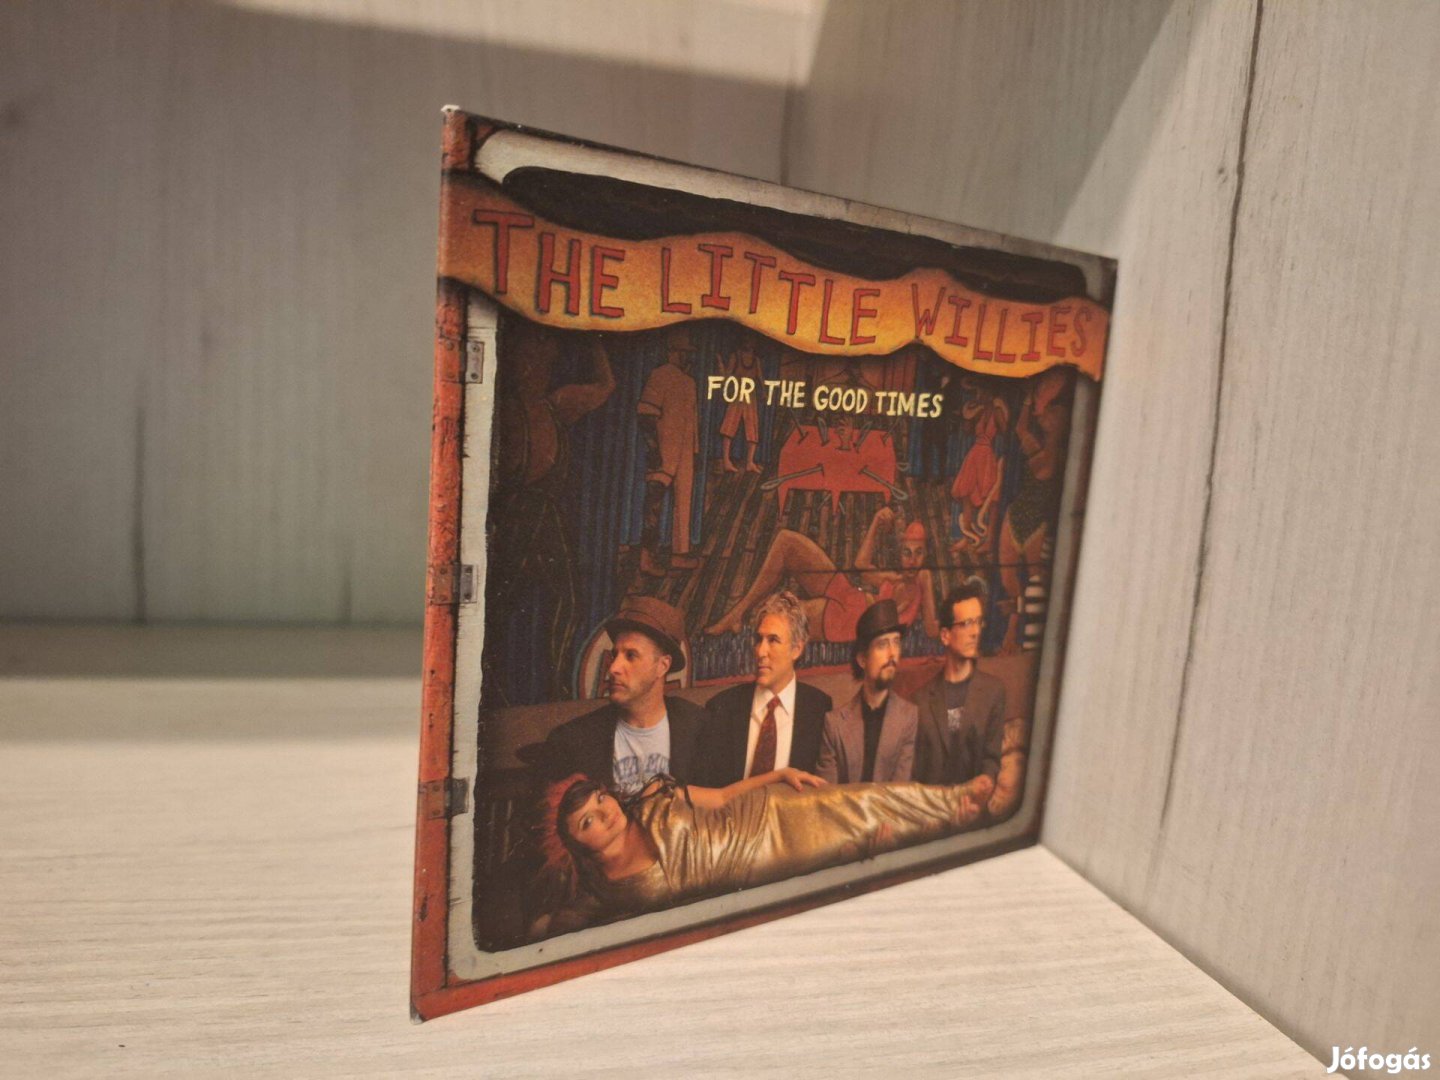 The Little Willies - For The Good Times CD